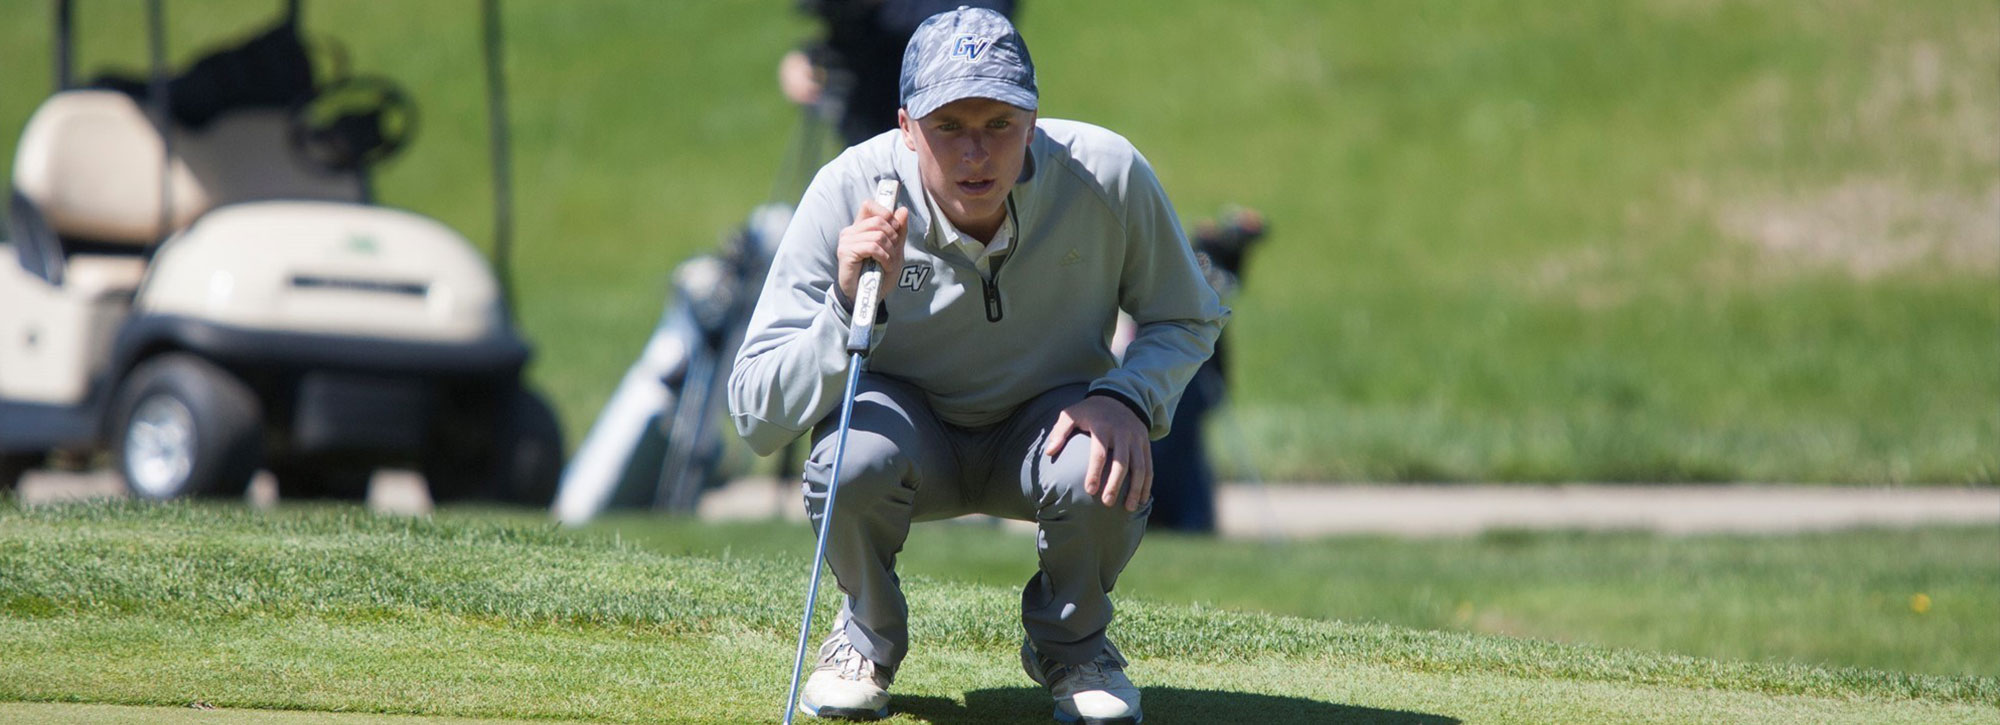 GVSU's Scott Named Semifinalist for Division II Jack Nicklaus National Player of the Year